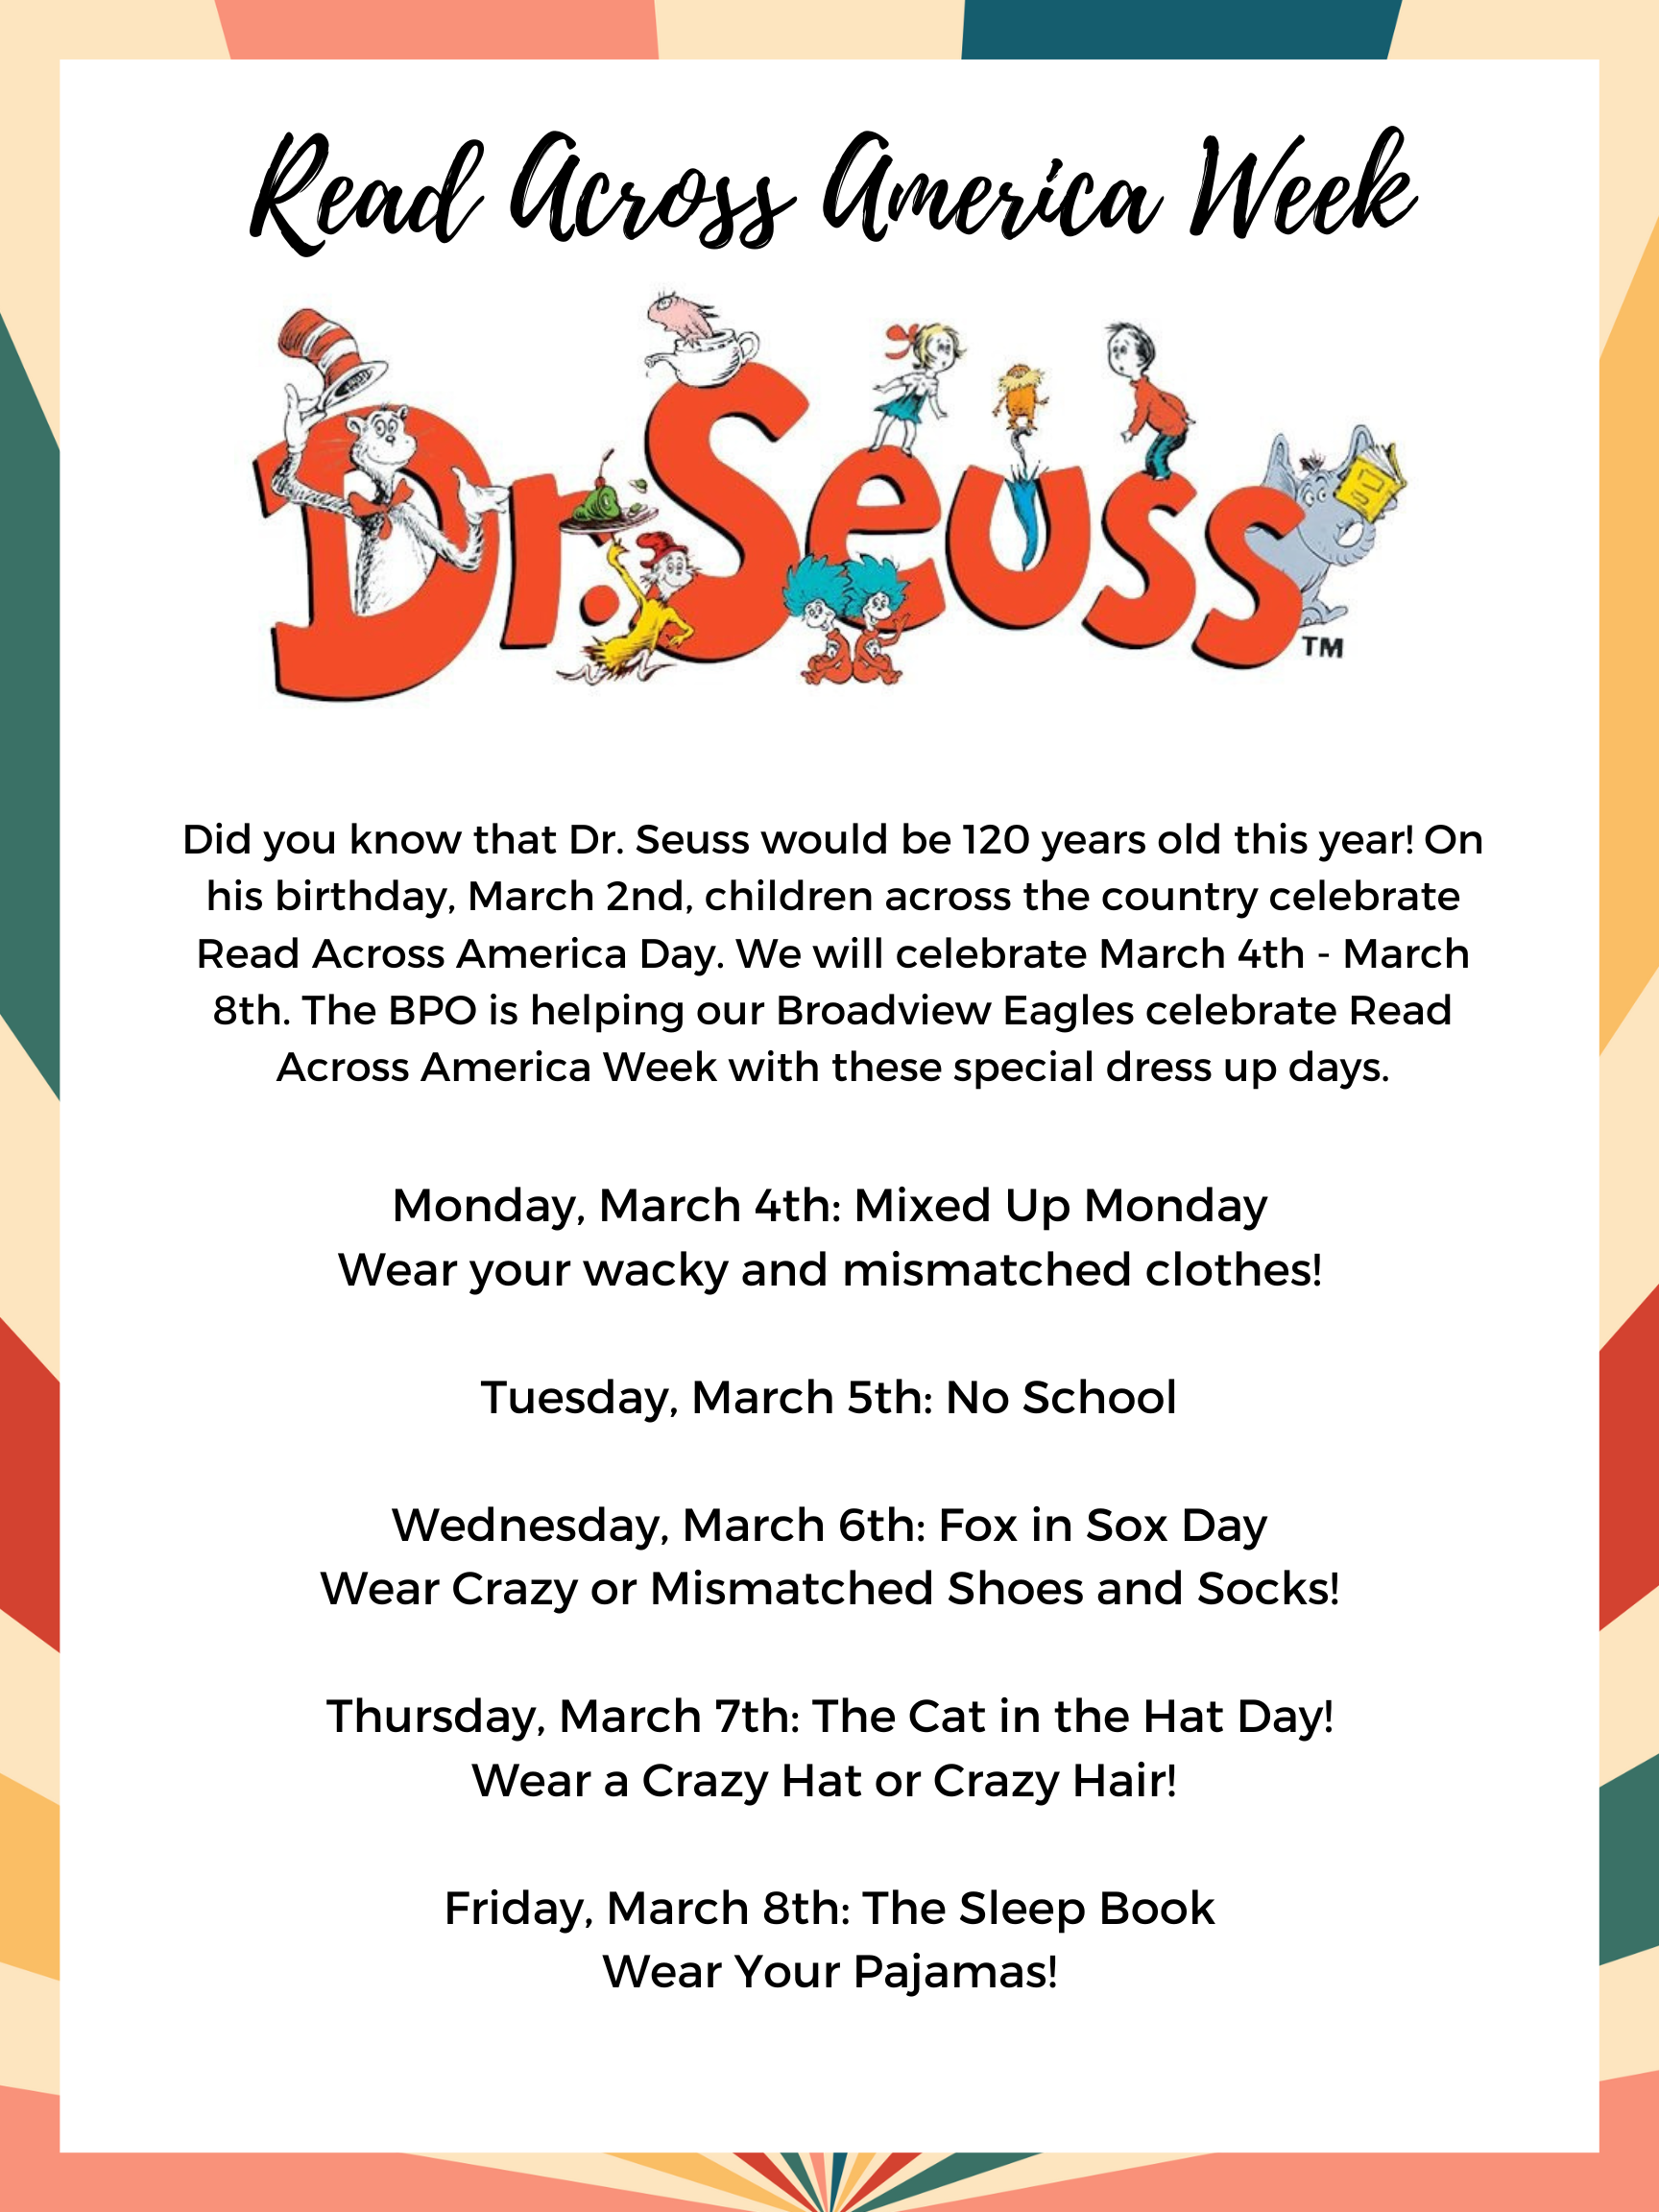 Read Across America Week. Dr. Seuss would be 120 years old this year. We are celebrating with special dress up days: Monday, March 4th - Mixed up Monday wear wacky mixed up clothes. Tuesday, March 5th - No School, Wednesday, March 6th Fox in Sox Day Wear crazy socks. Thursday, March 7th Cat in the Hat Day wear crazy hair or a hat. Friday, March 8th, The Sleep Book wear pajamas.